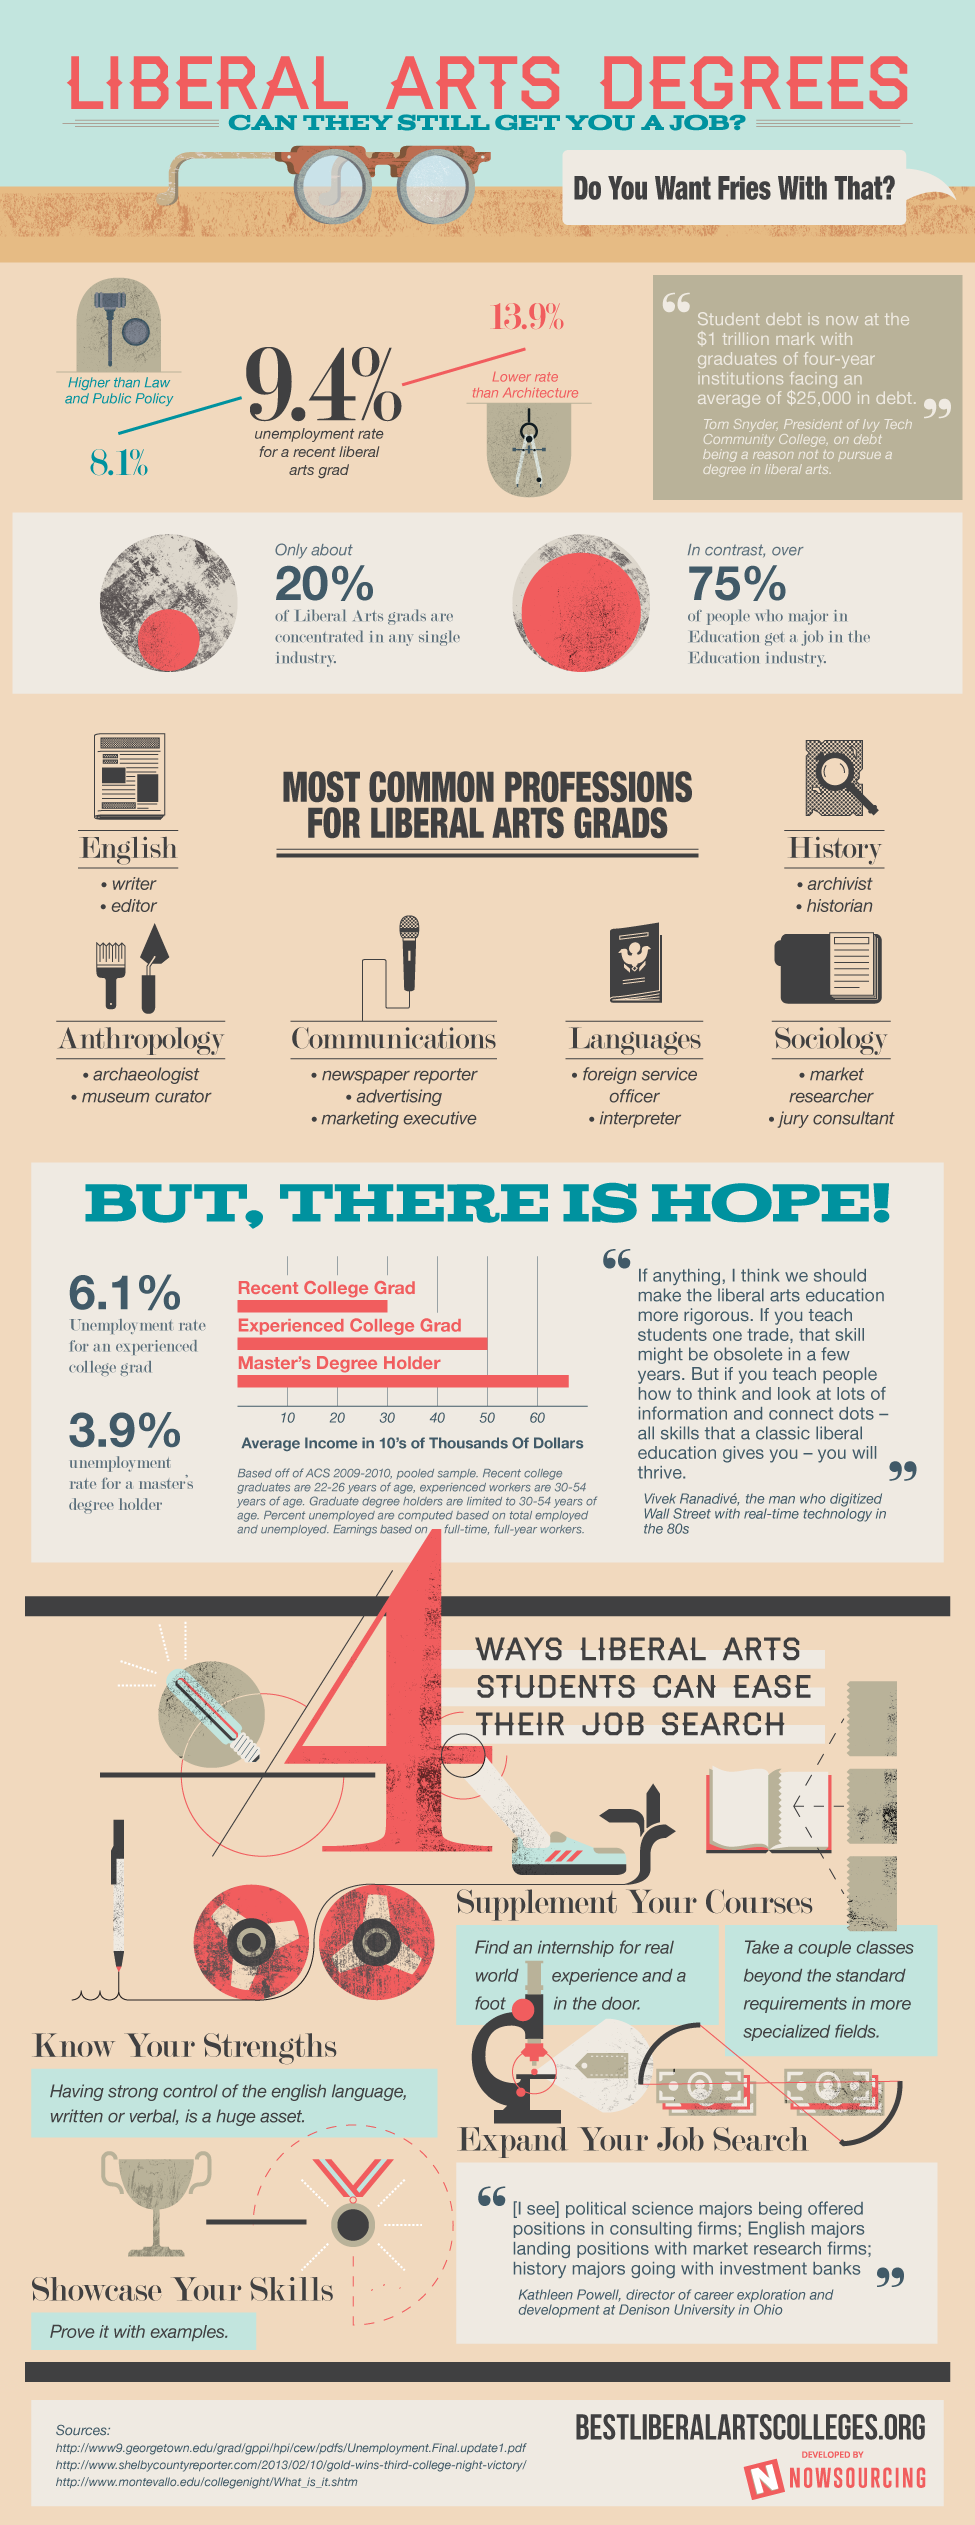 Liberal Arts Degrees: Can They Still Get You a Job?